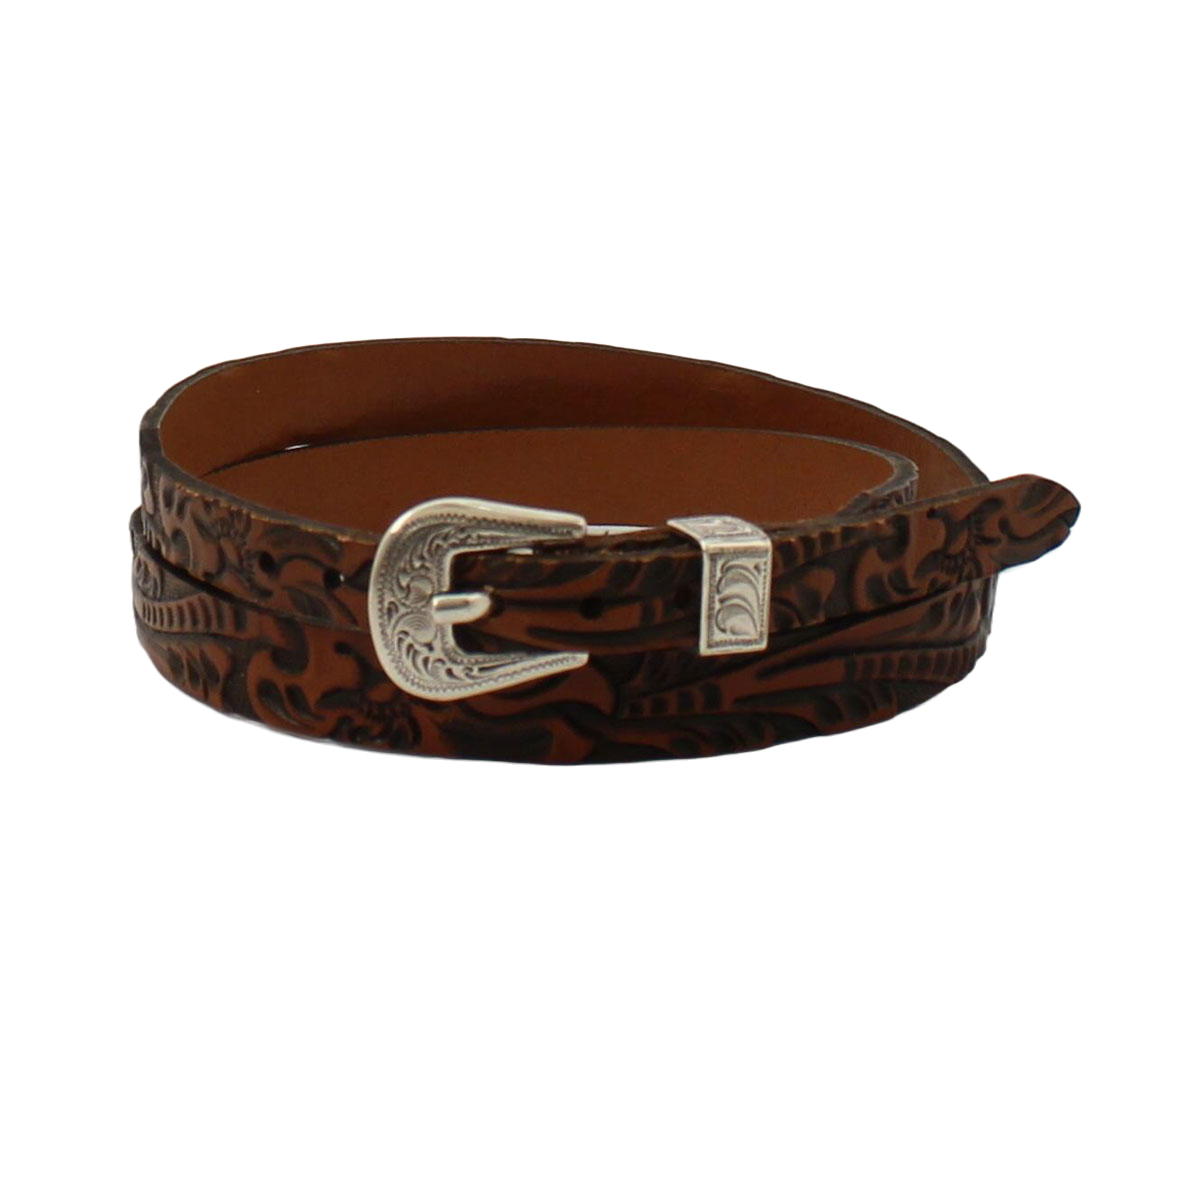 Twister Western Floral Embossed Brown Leather Hatband 0275102